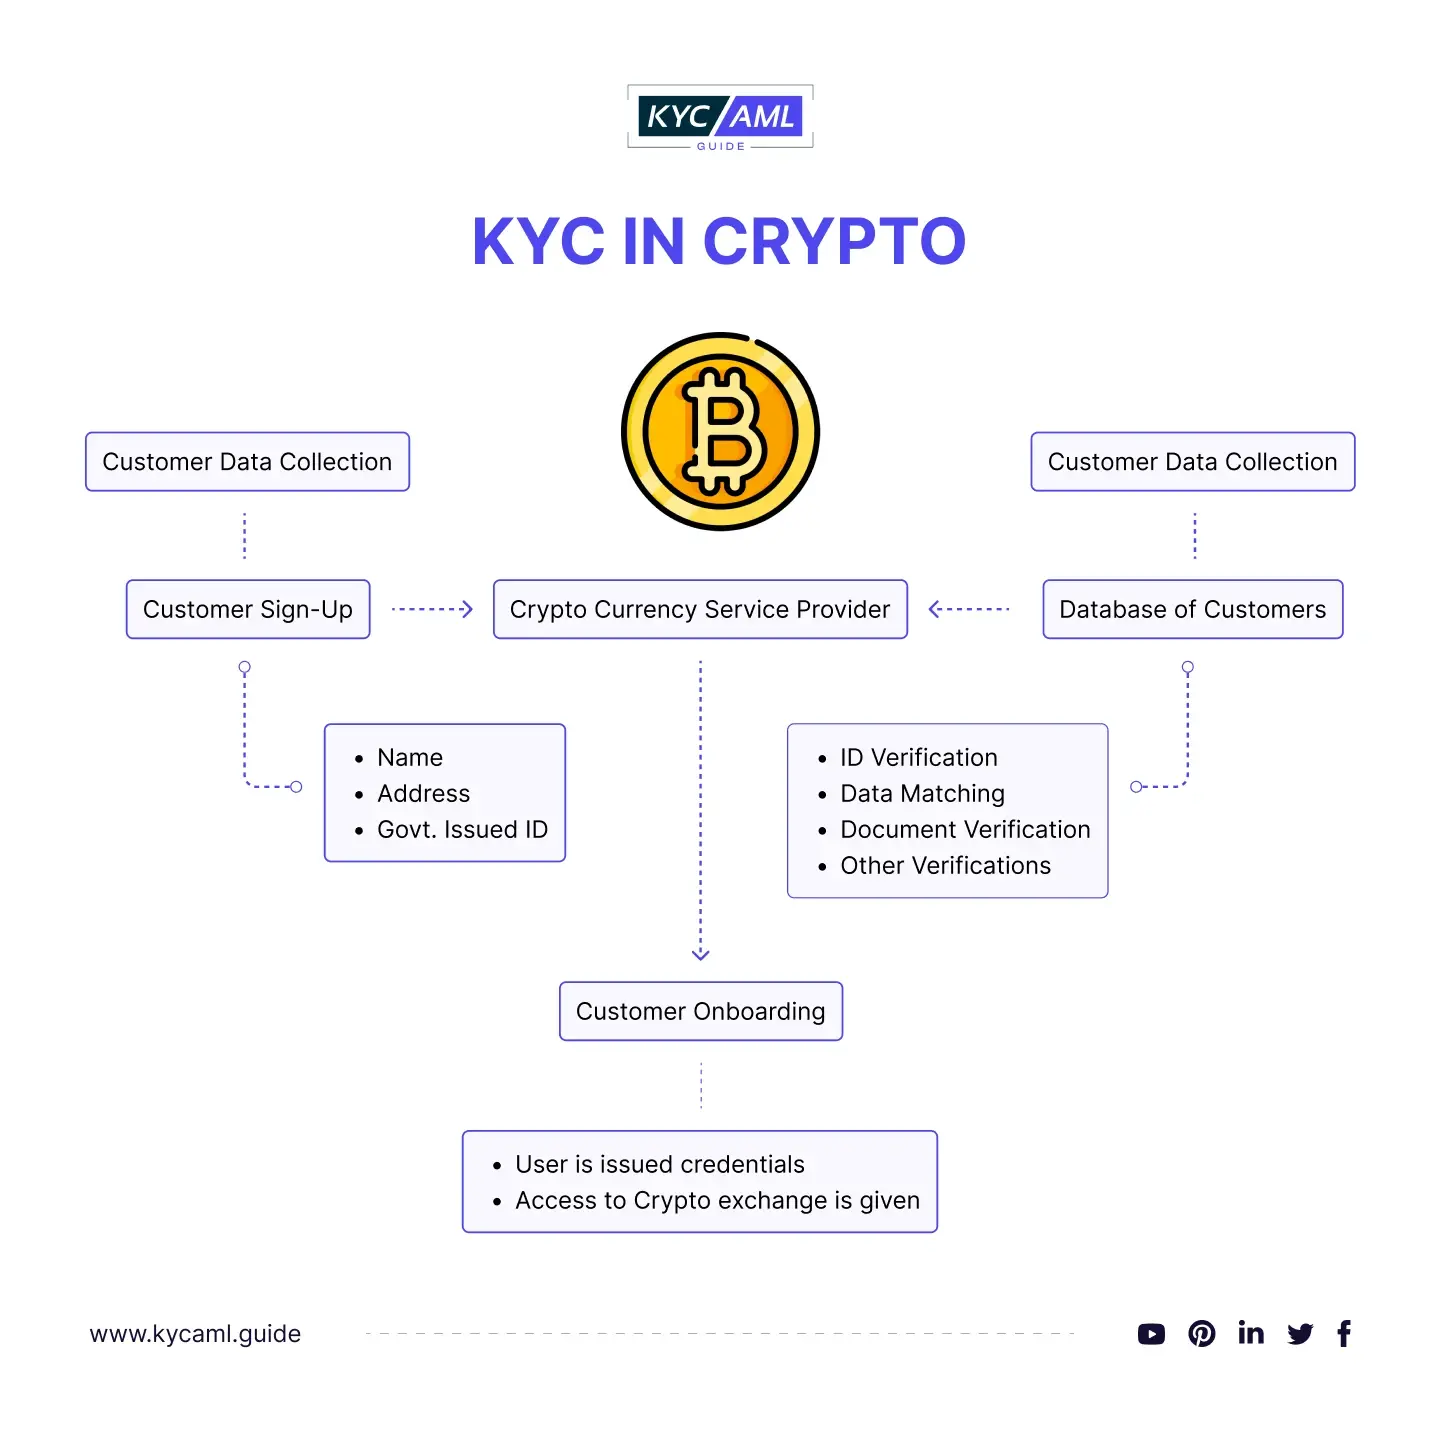 KYC in Crypto Infographic